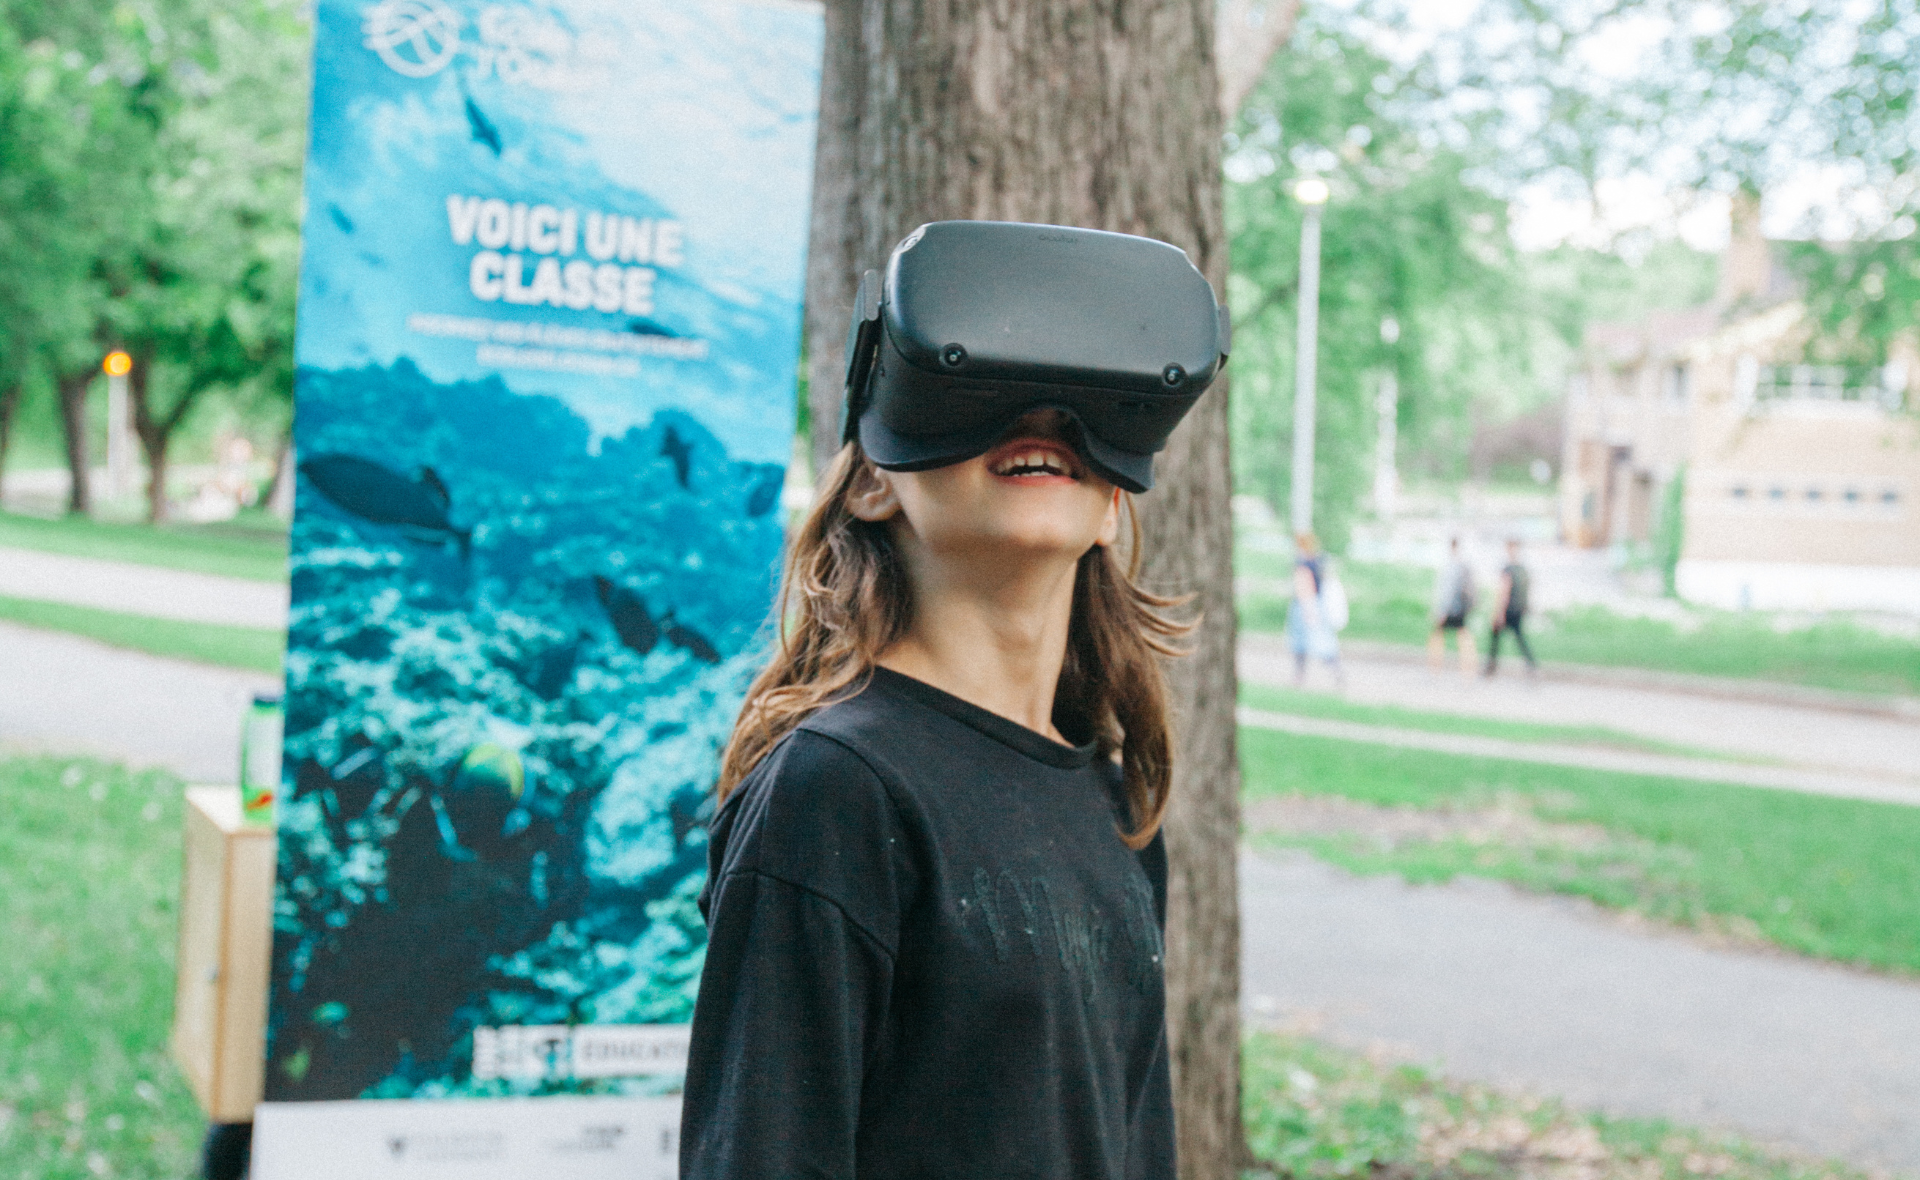 Outside, a child tries out Ocean School resources with a VR headset. In the background is an Ocean School promotional banner.